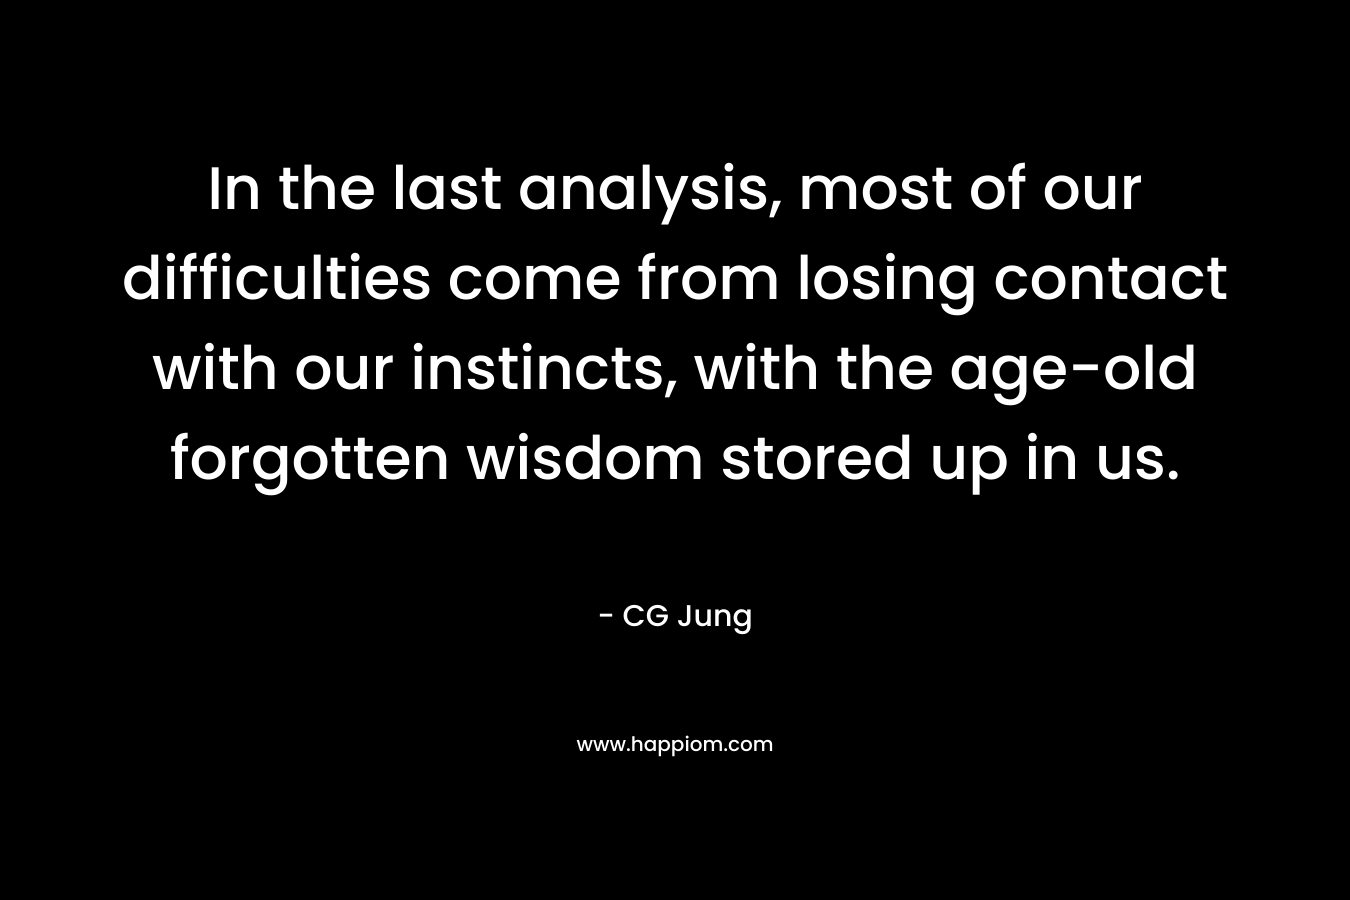 In the last analysis, most of our difficulties come from losing contact with our instincts, with the age-old forgotten wisdom stored up in us. – CG Jung